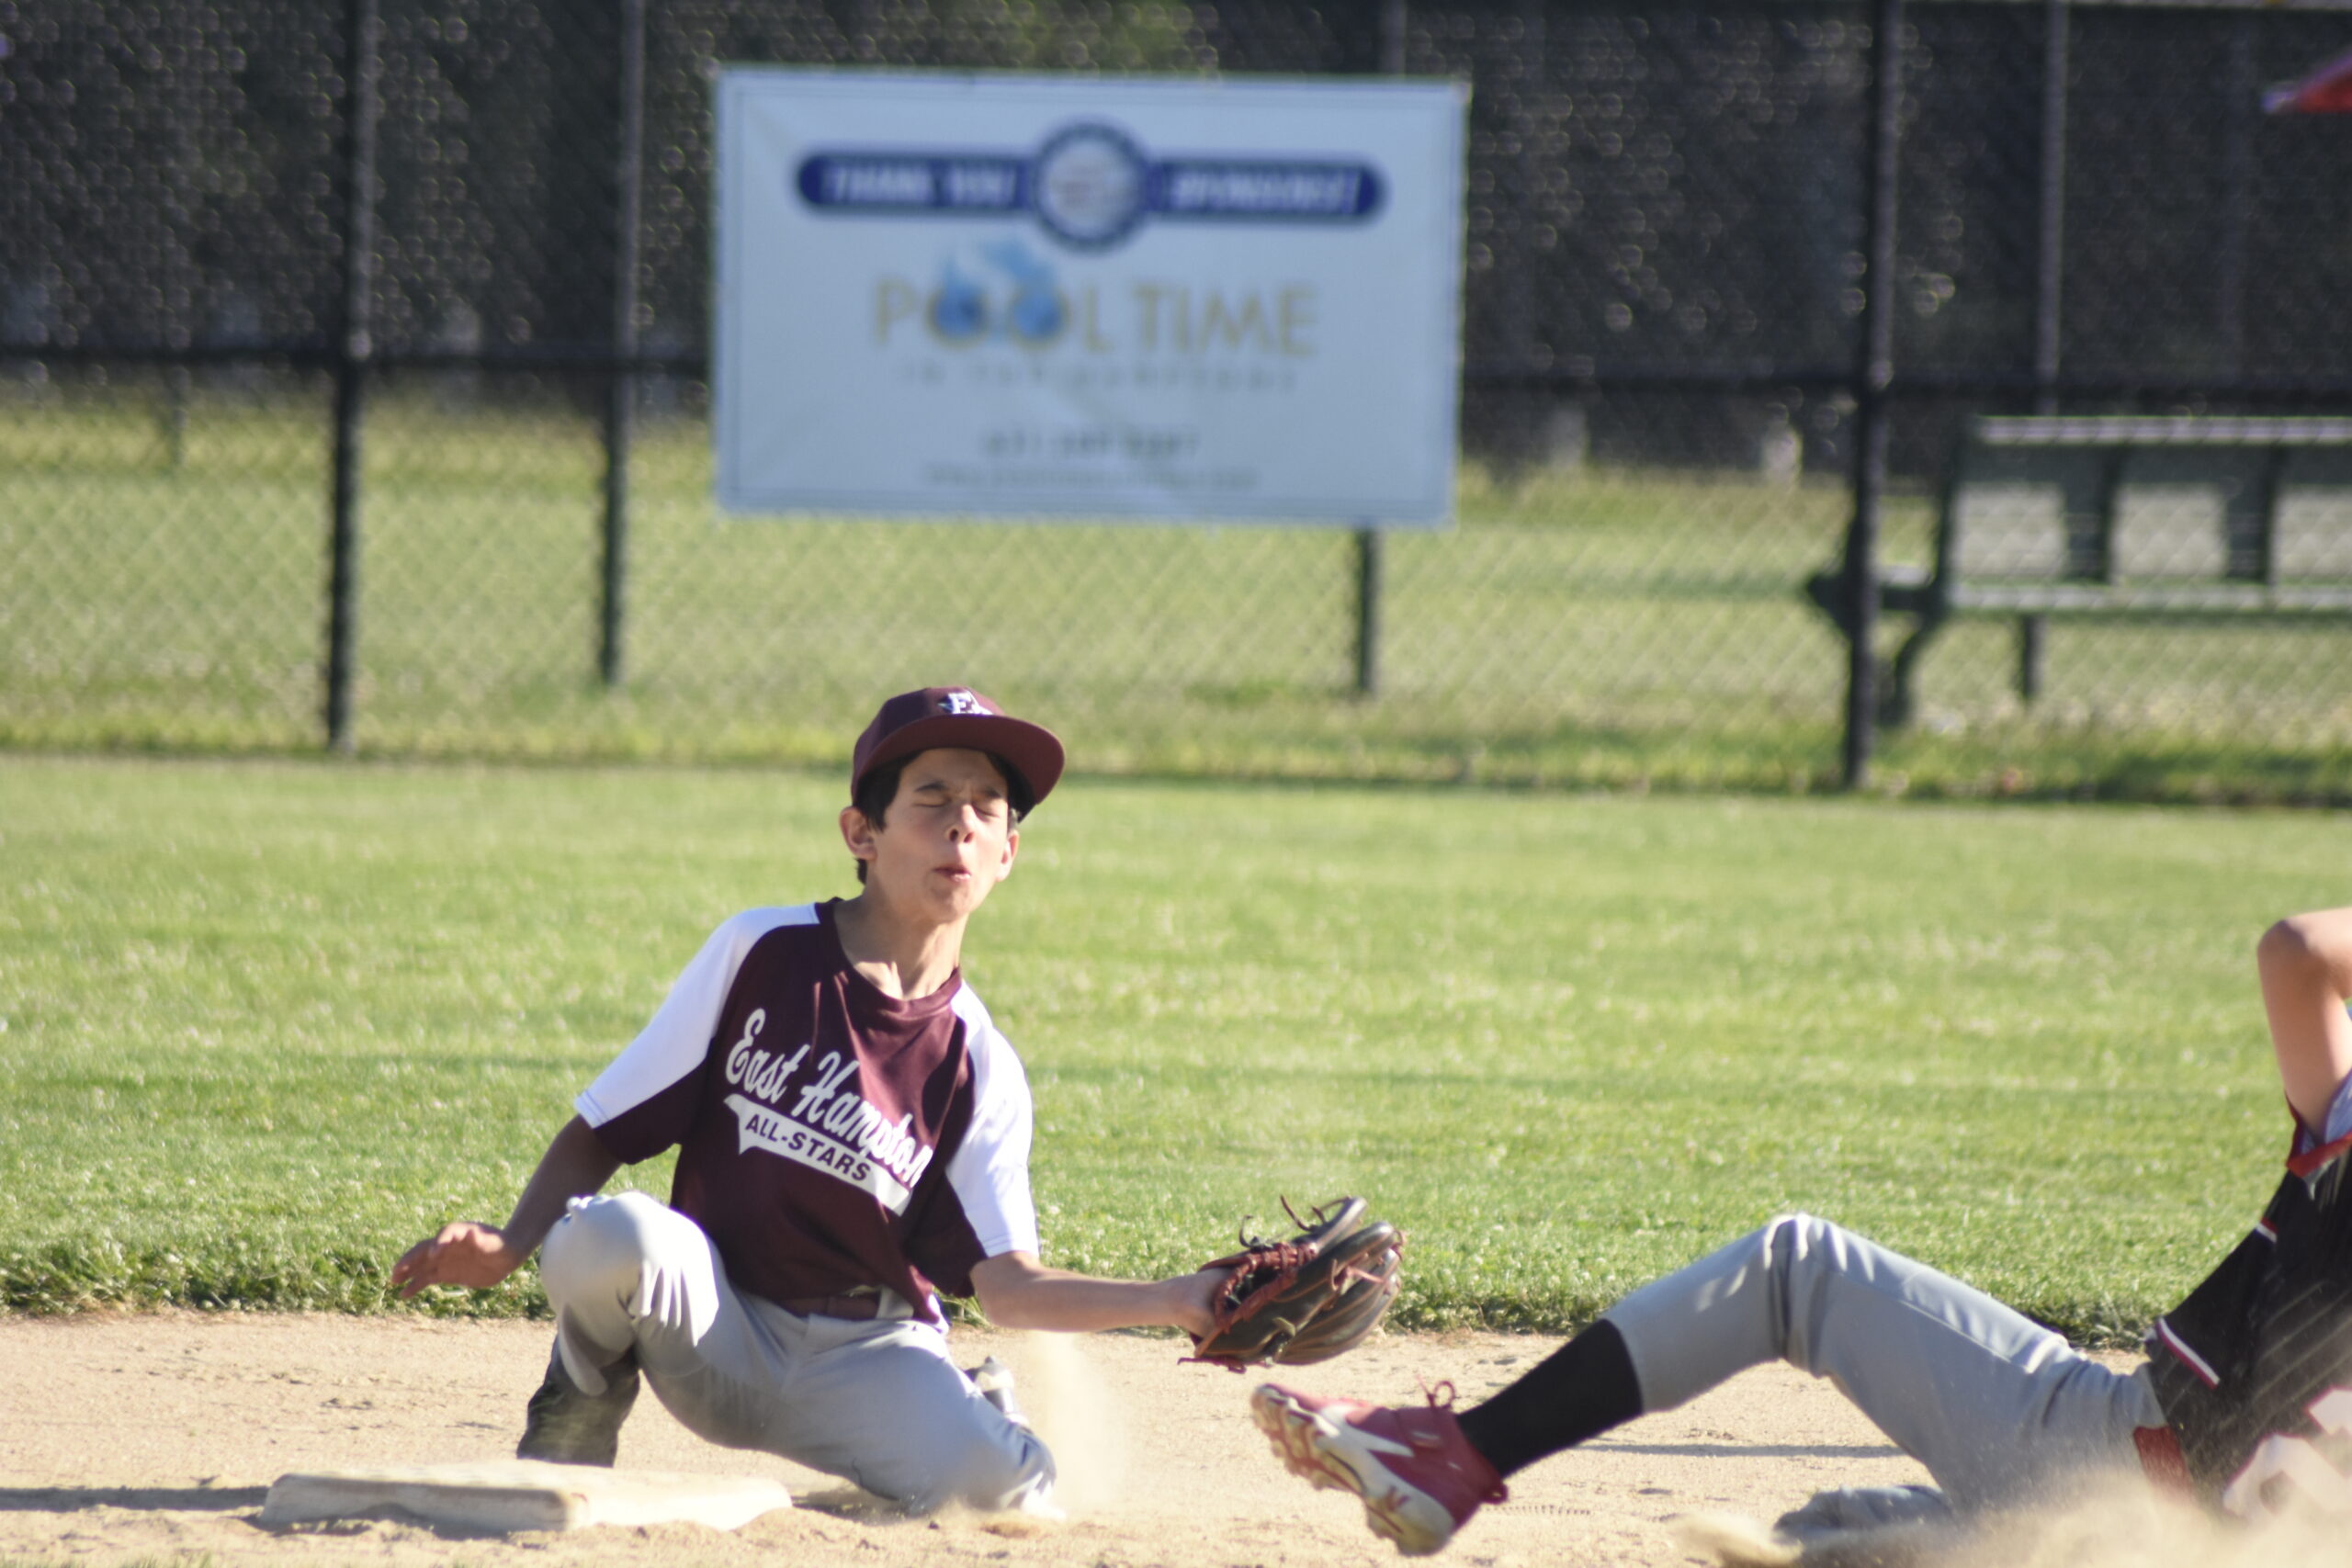 East Hampton's Harry Thomas catches a throw from catcher Elias Wojtusiak and applies a tag to catch a North Patchogue-Medford base runner attempting to steal second base.    DREW BUDD